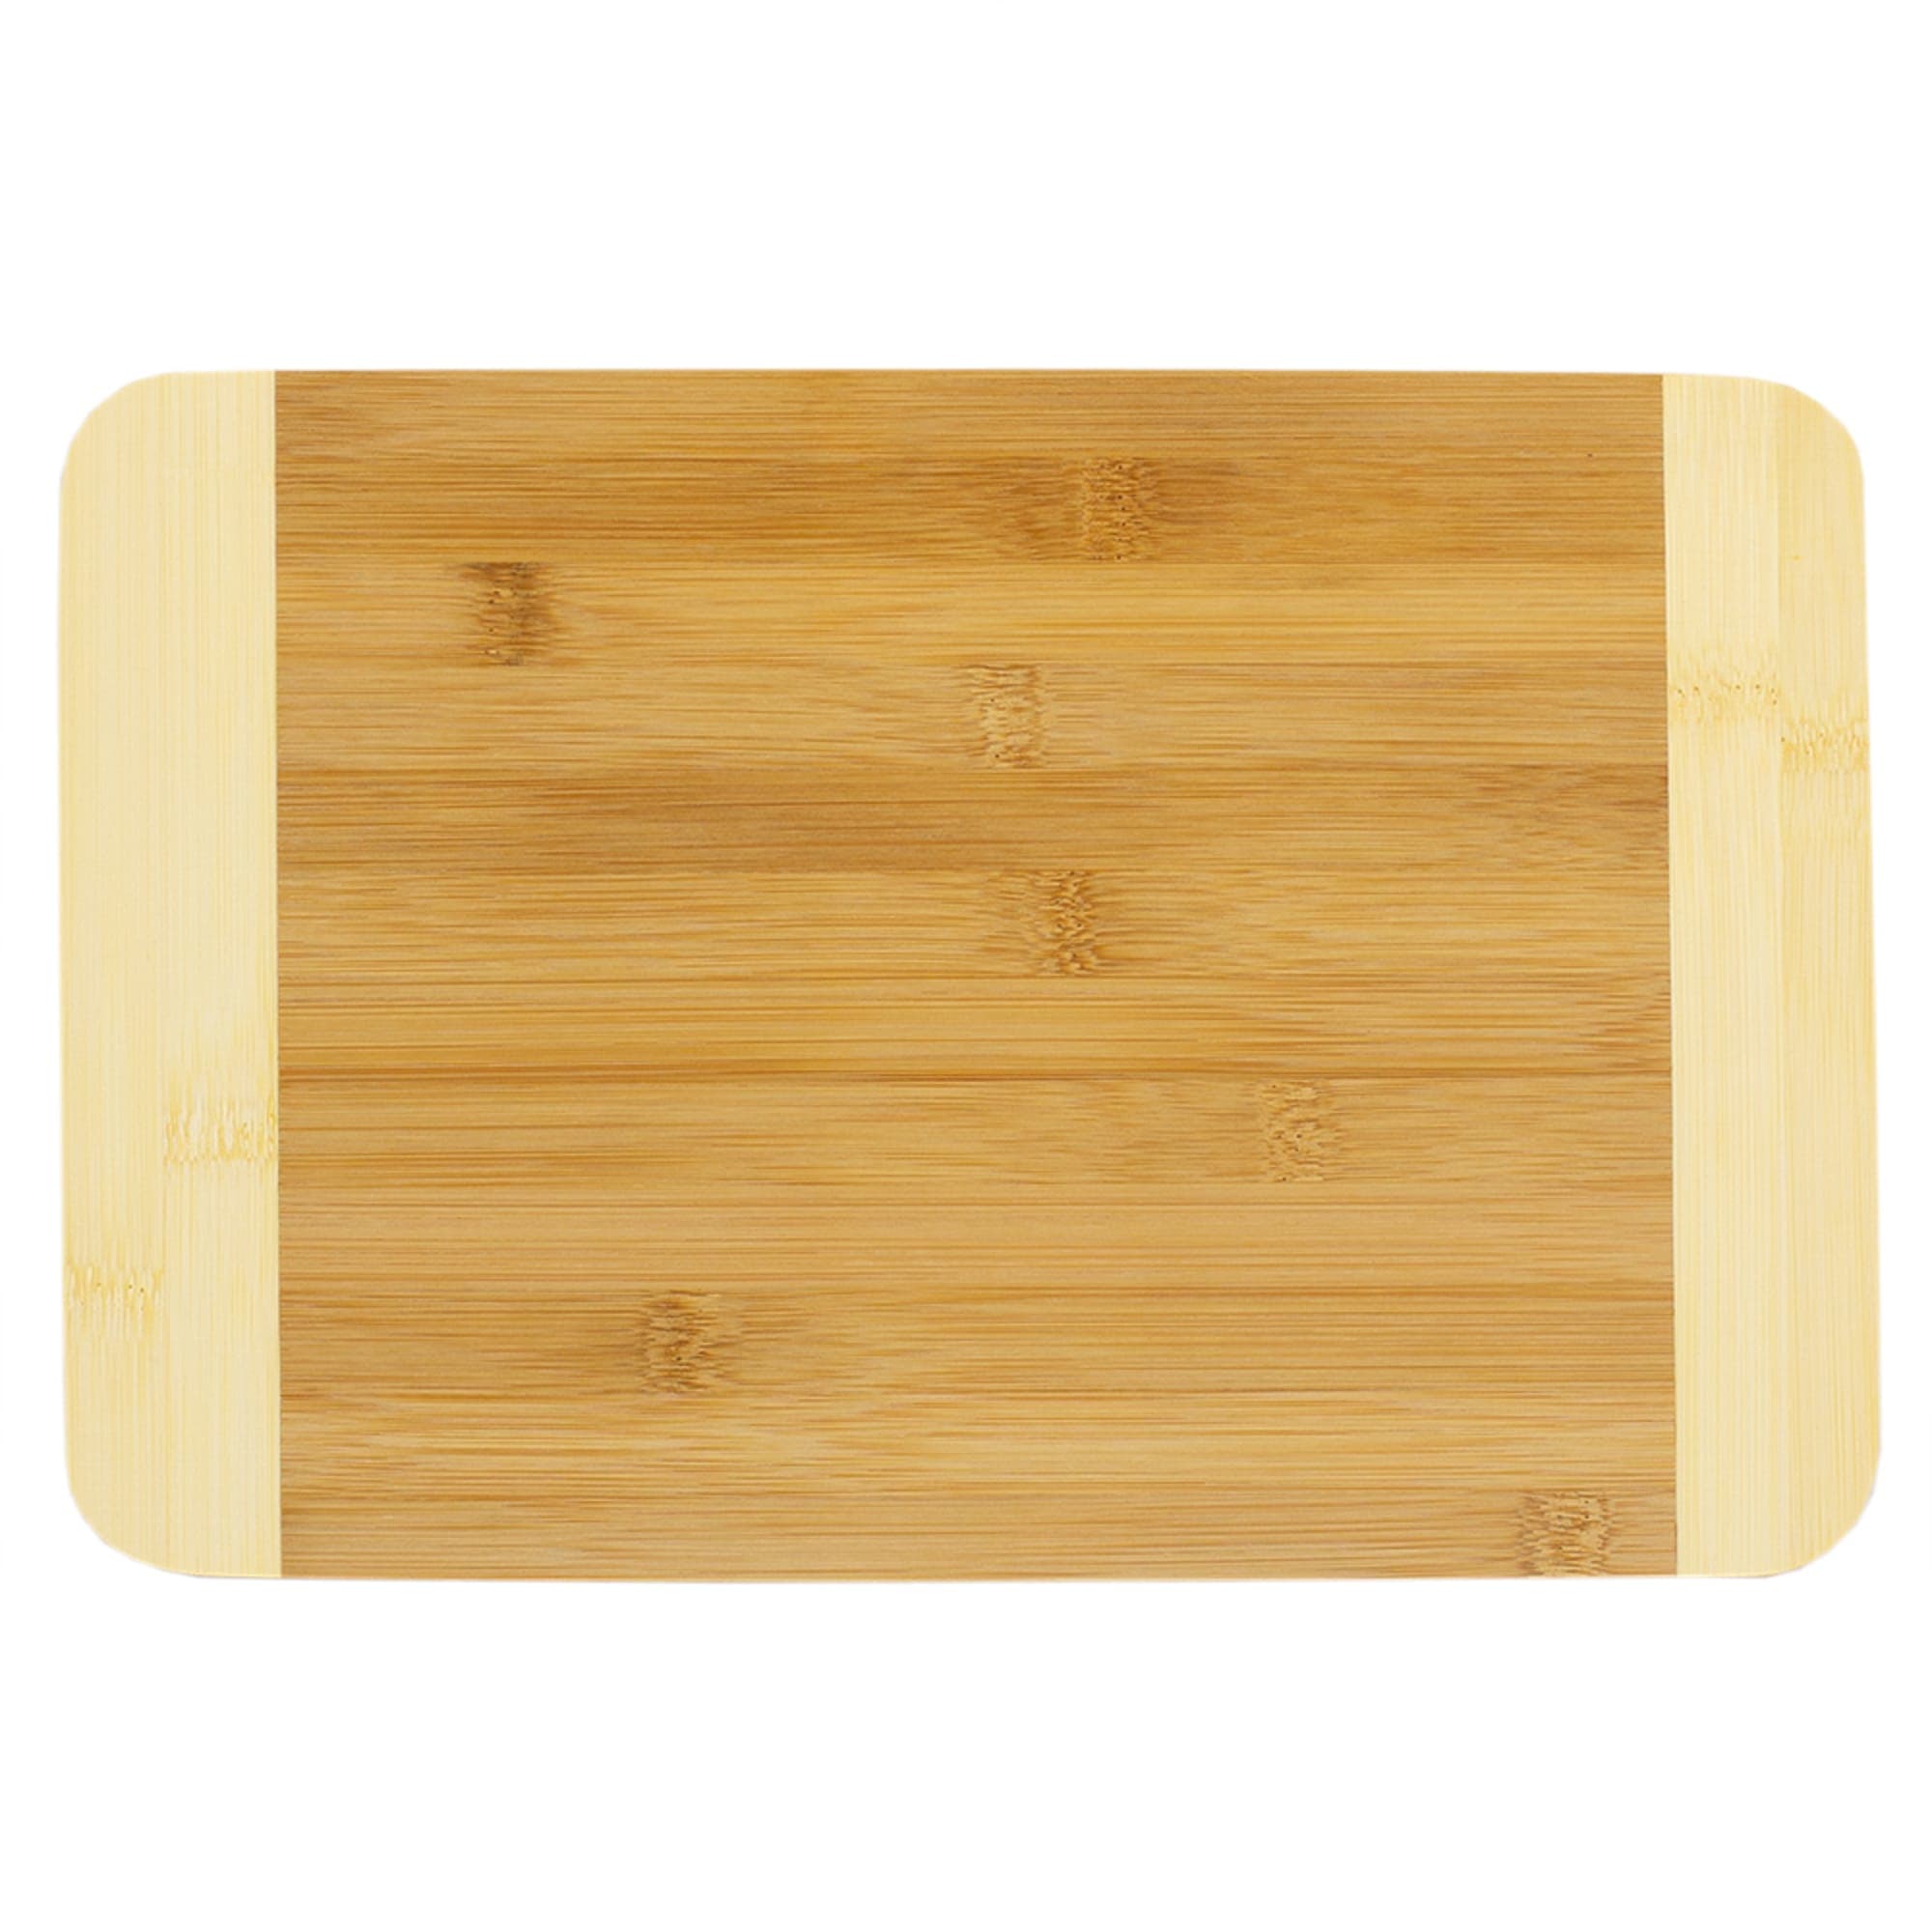 Home Basics 8" x 12" Two Tone Bamboo Cutting Board $4.00 EACH, CASE PACK OF 24